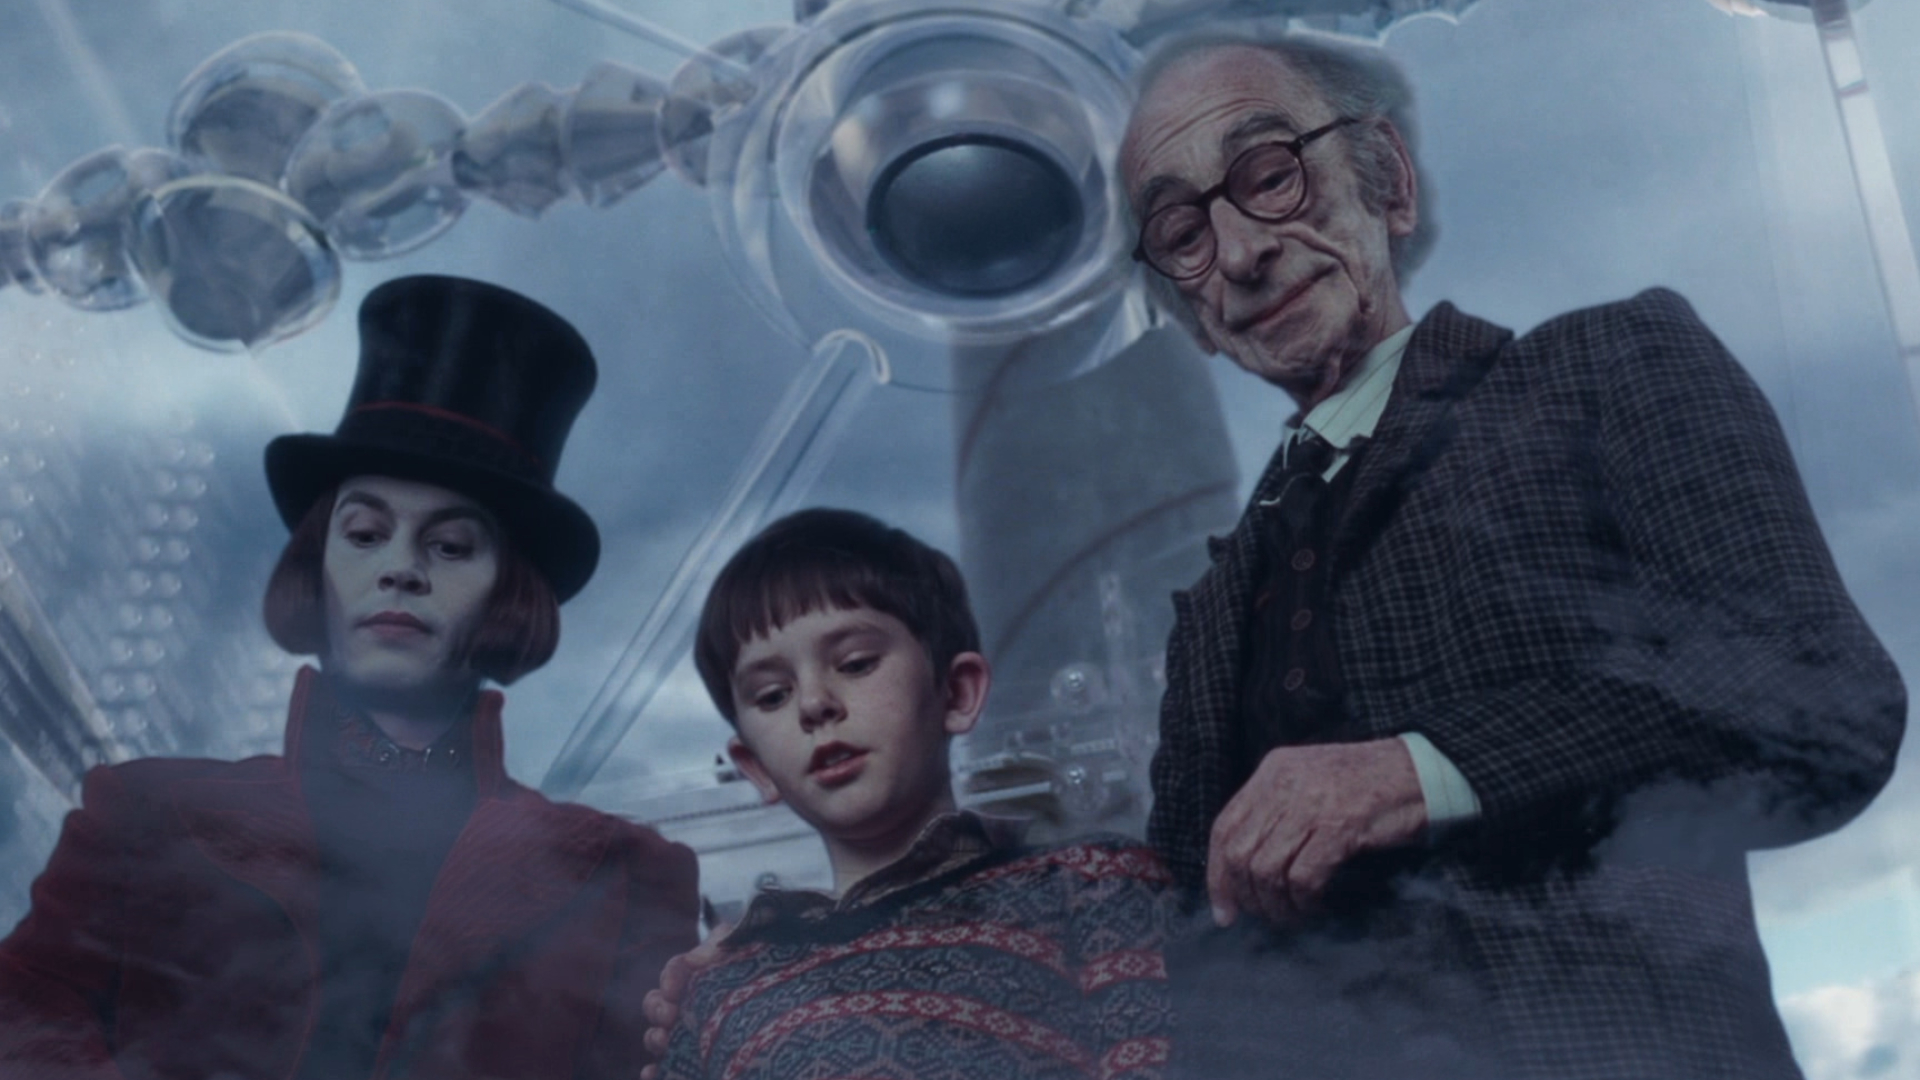 Freddie Highmore as Charlie, Charlie and the Chocolate Factory, 10th anniversary, BD screen caps, 1920x1080 Full HD Desktop